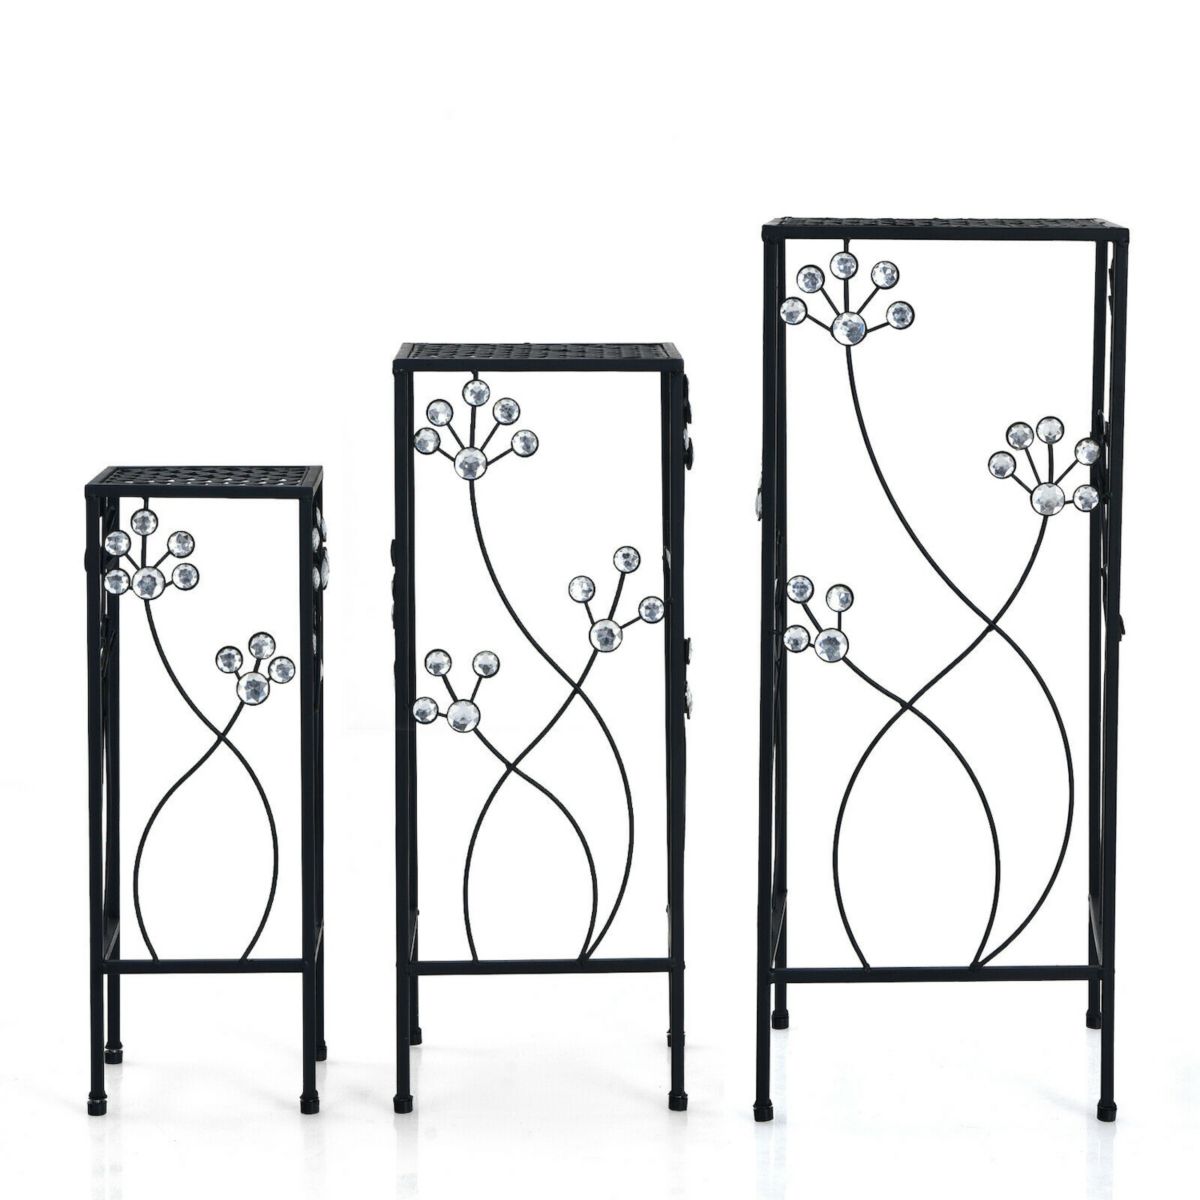 3 Pieces Flower Pots Display Rack with Vines and Crystal Floral Accents Square-Black Slickblue